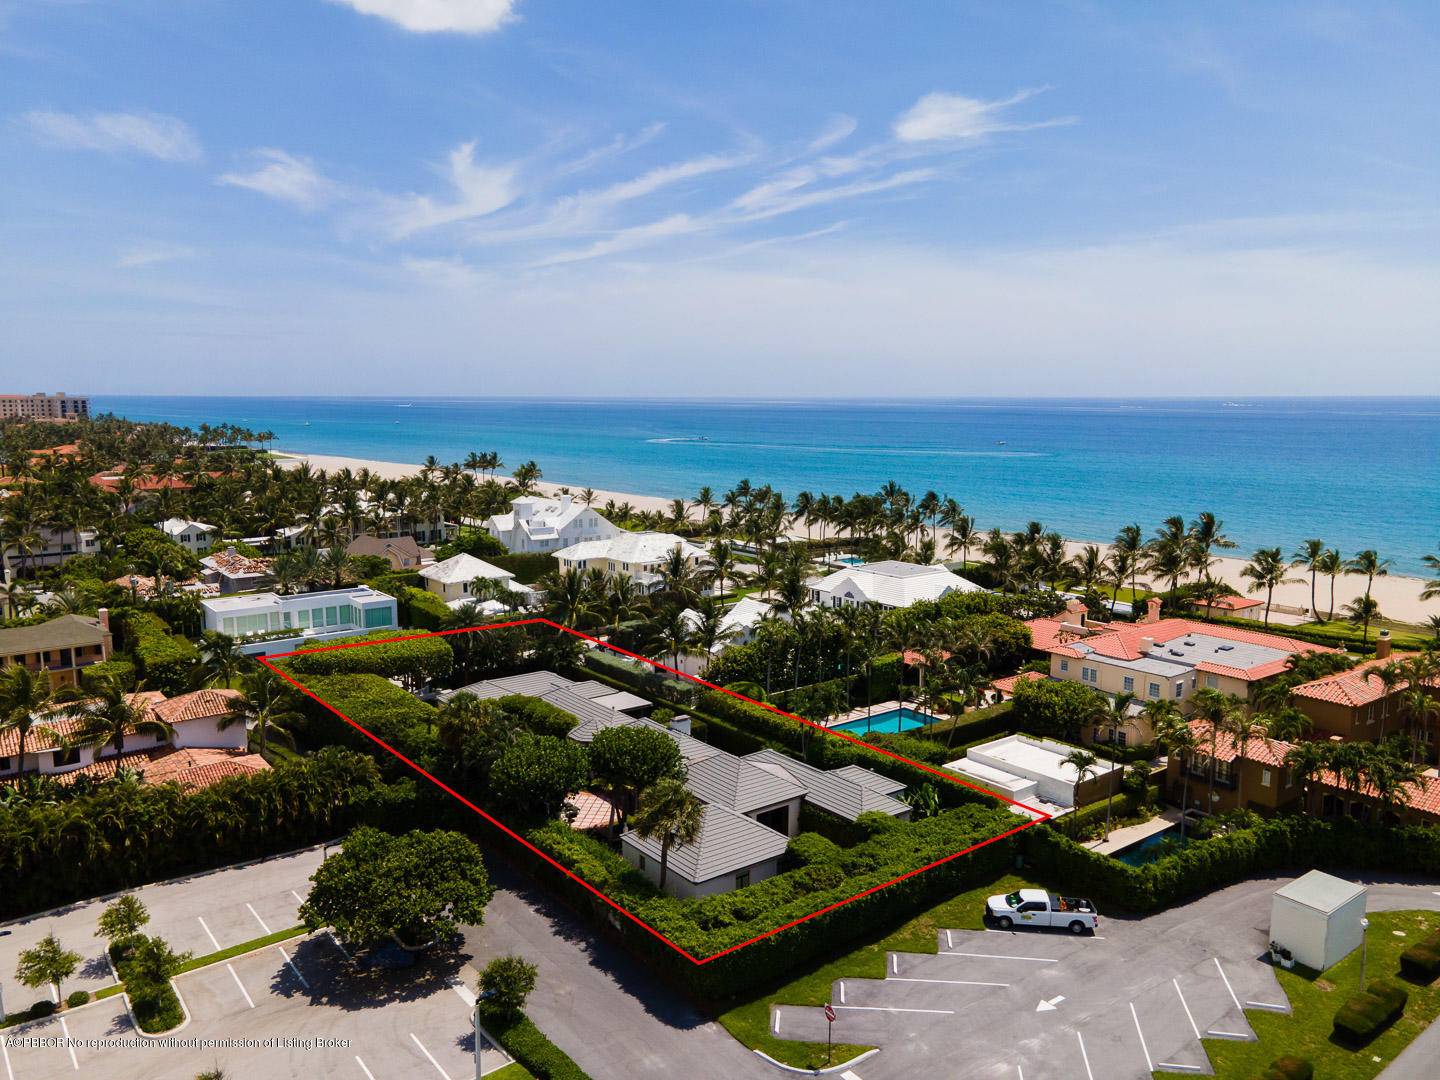 Spectacular 4BR 4. 1BA estate with 5, 351 total square feet on the Ocean Block of Seaview Avenue, just one house from the beach.